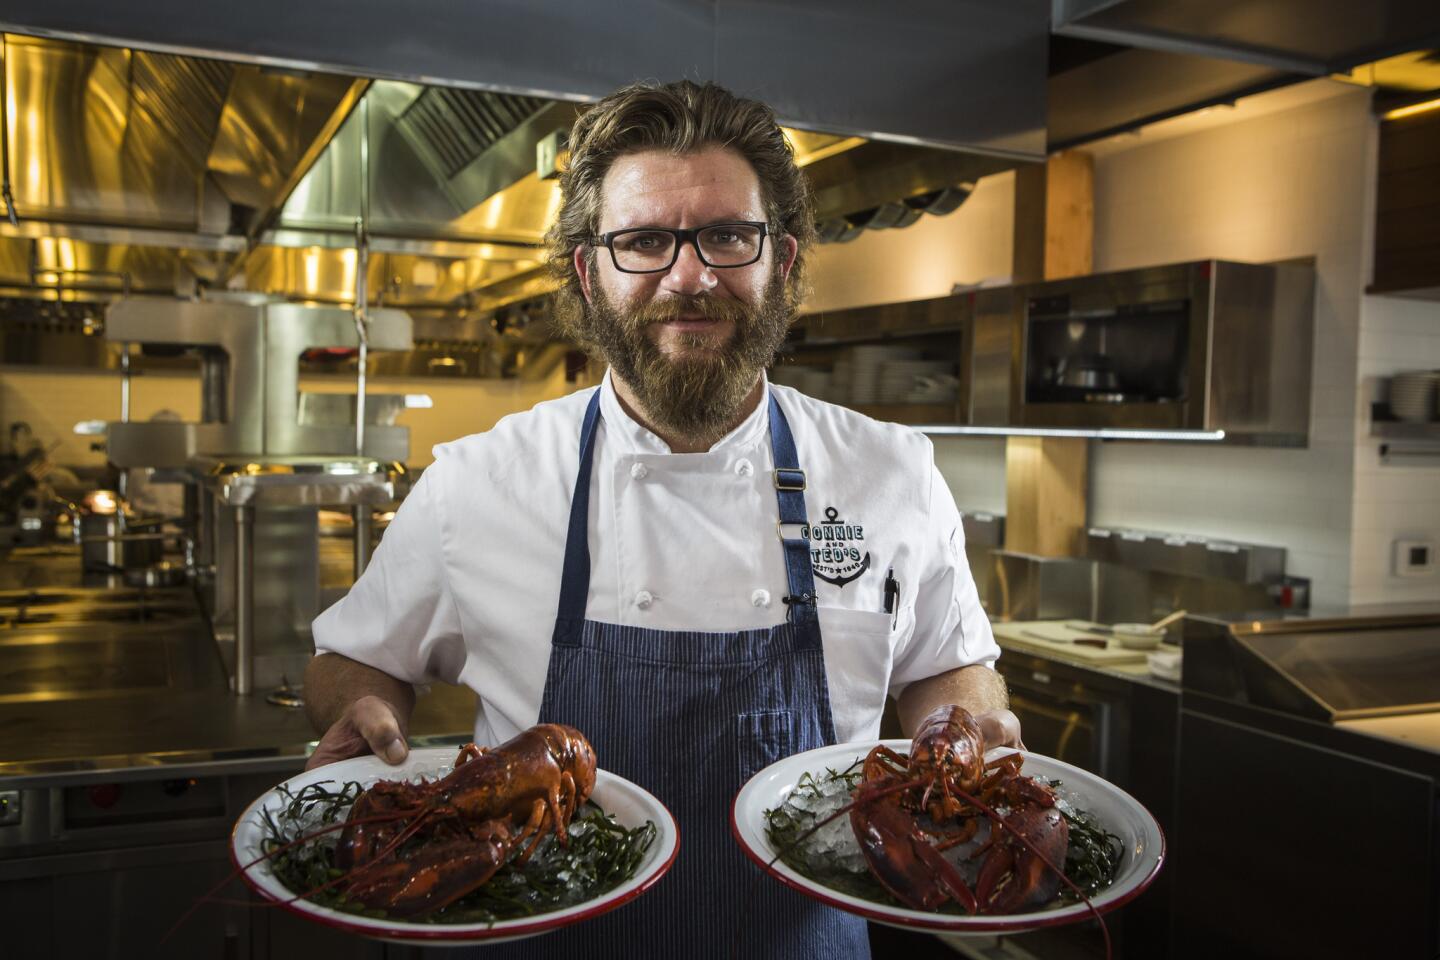 Connie and Ted's chef Michael Cimarusti will co-host a session at The Taste called "Field to Fork" and will join a panel on sustainable seafood.